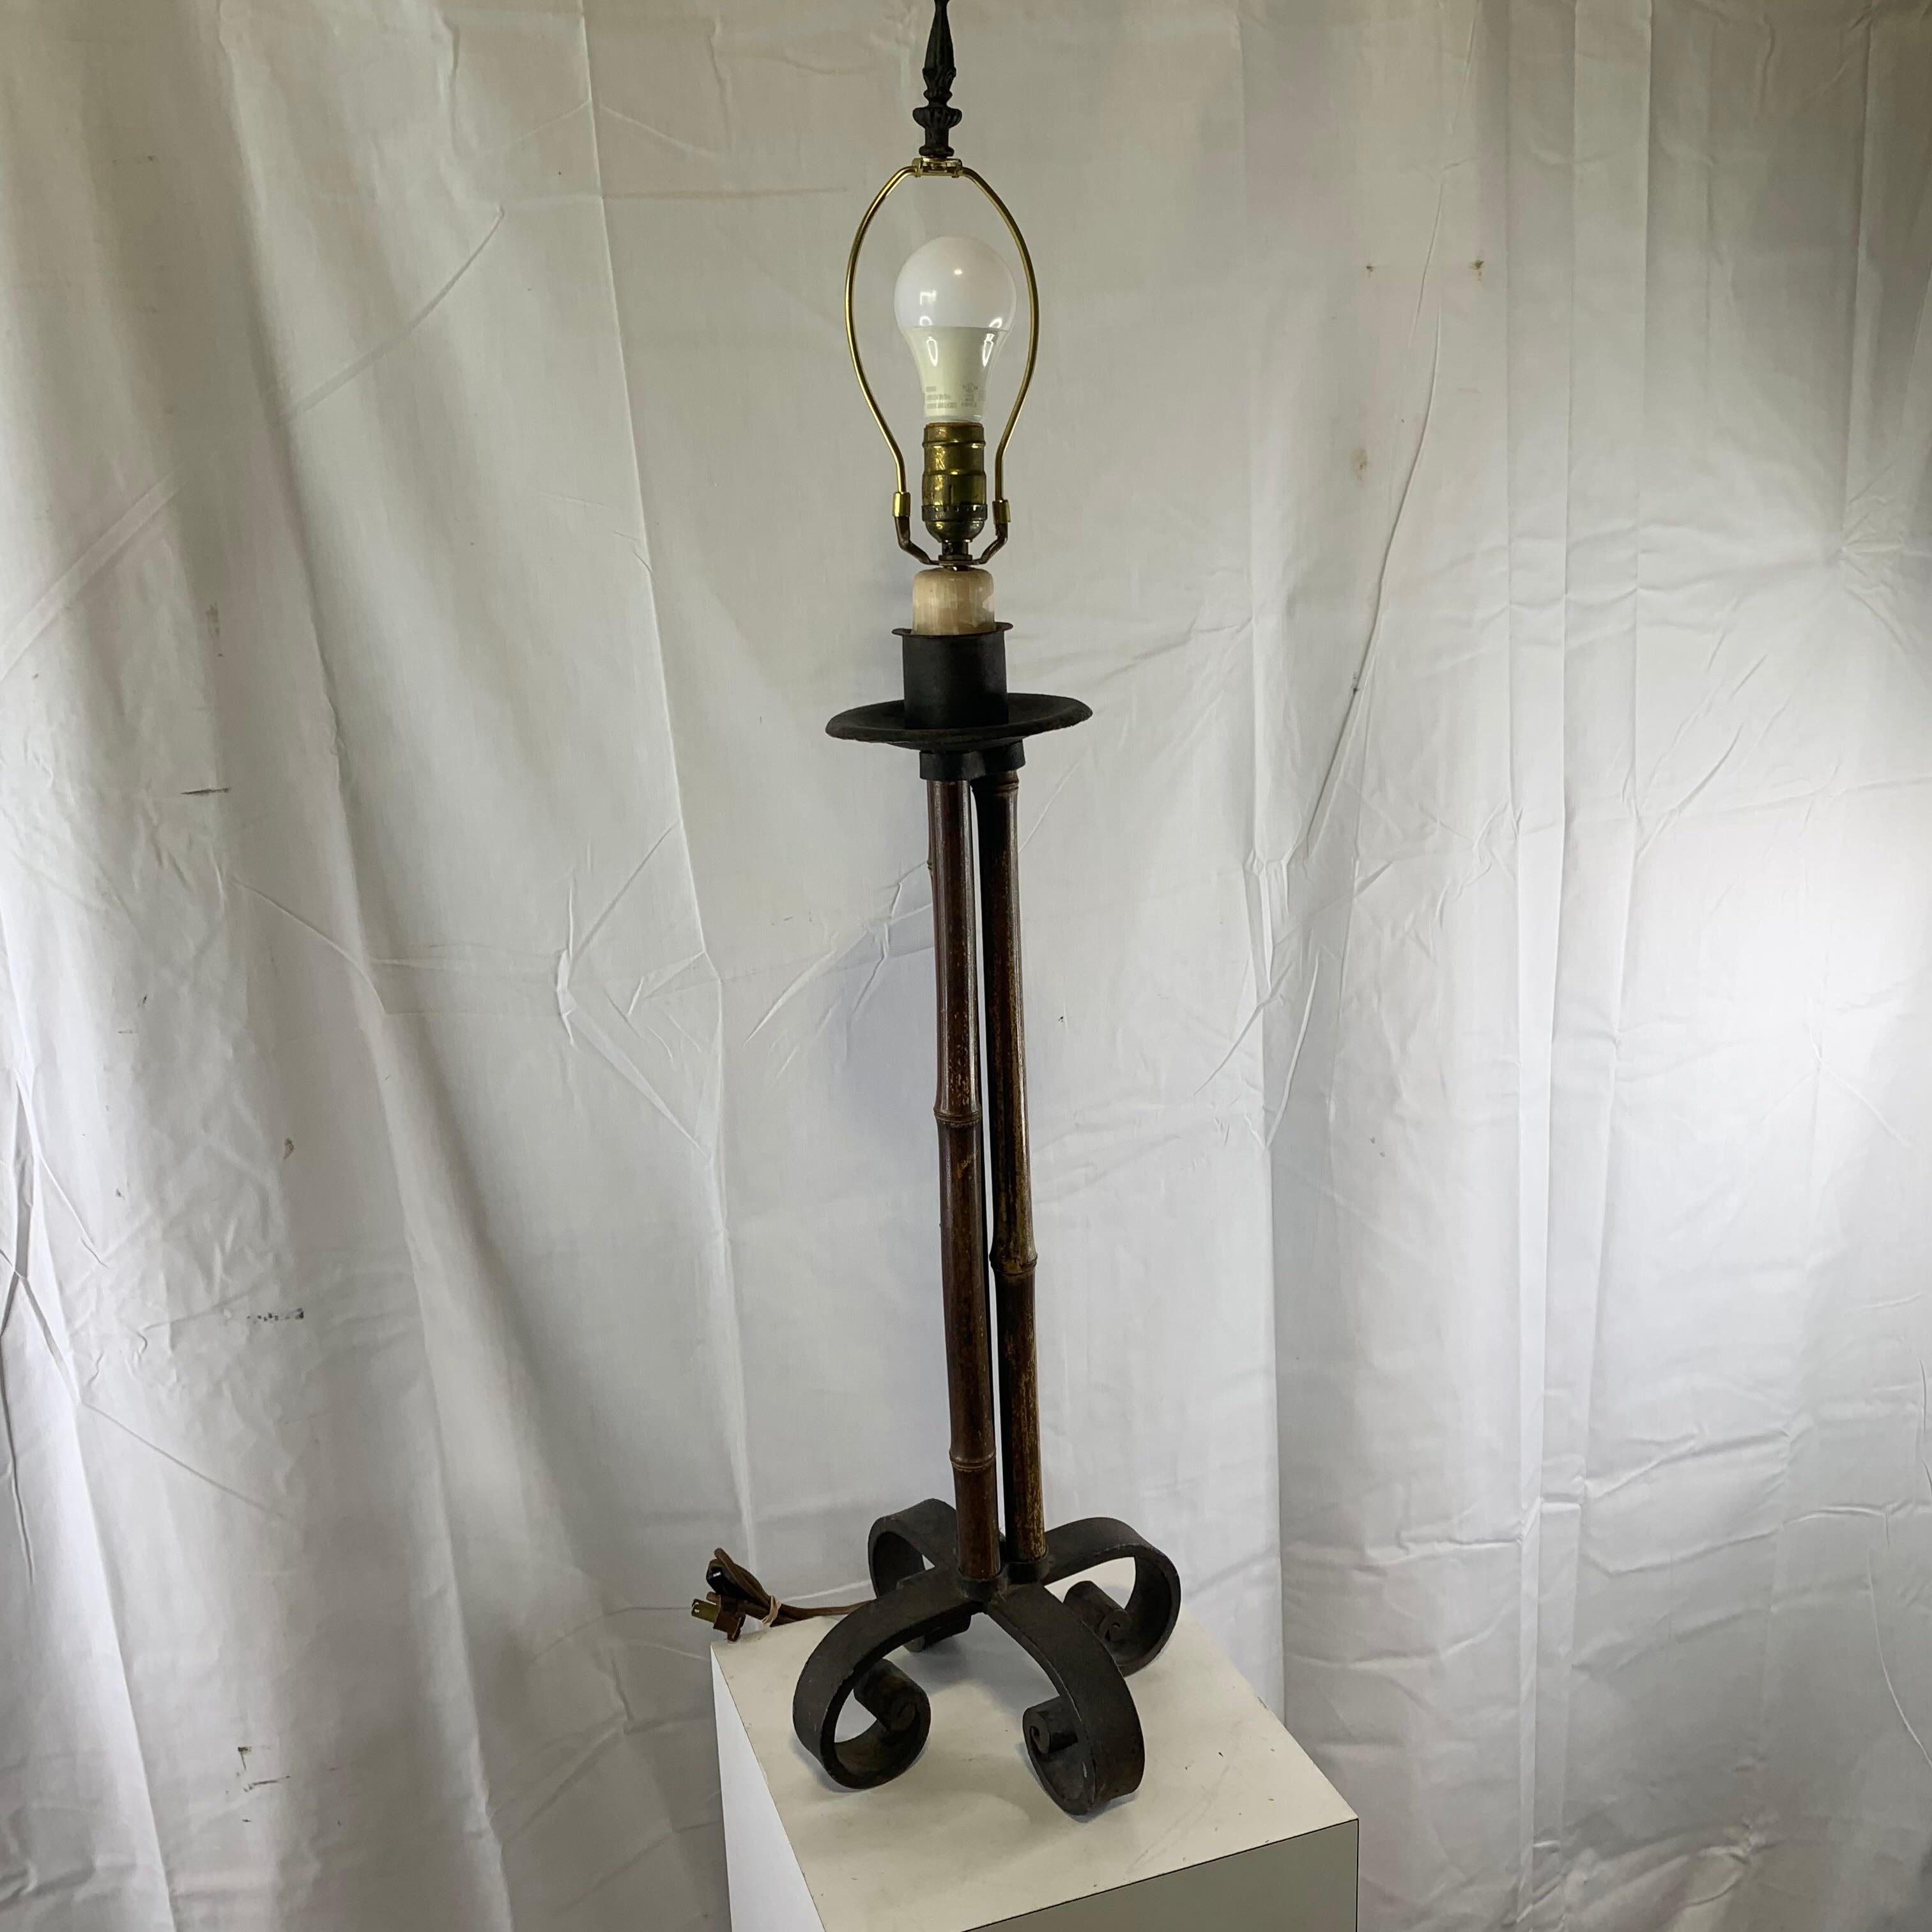 8"x 8"x 40.5" Laura Lee Designs Madison Bamboo Table Lamp